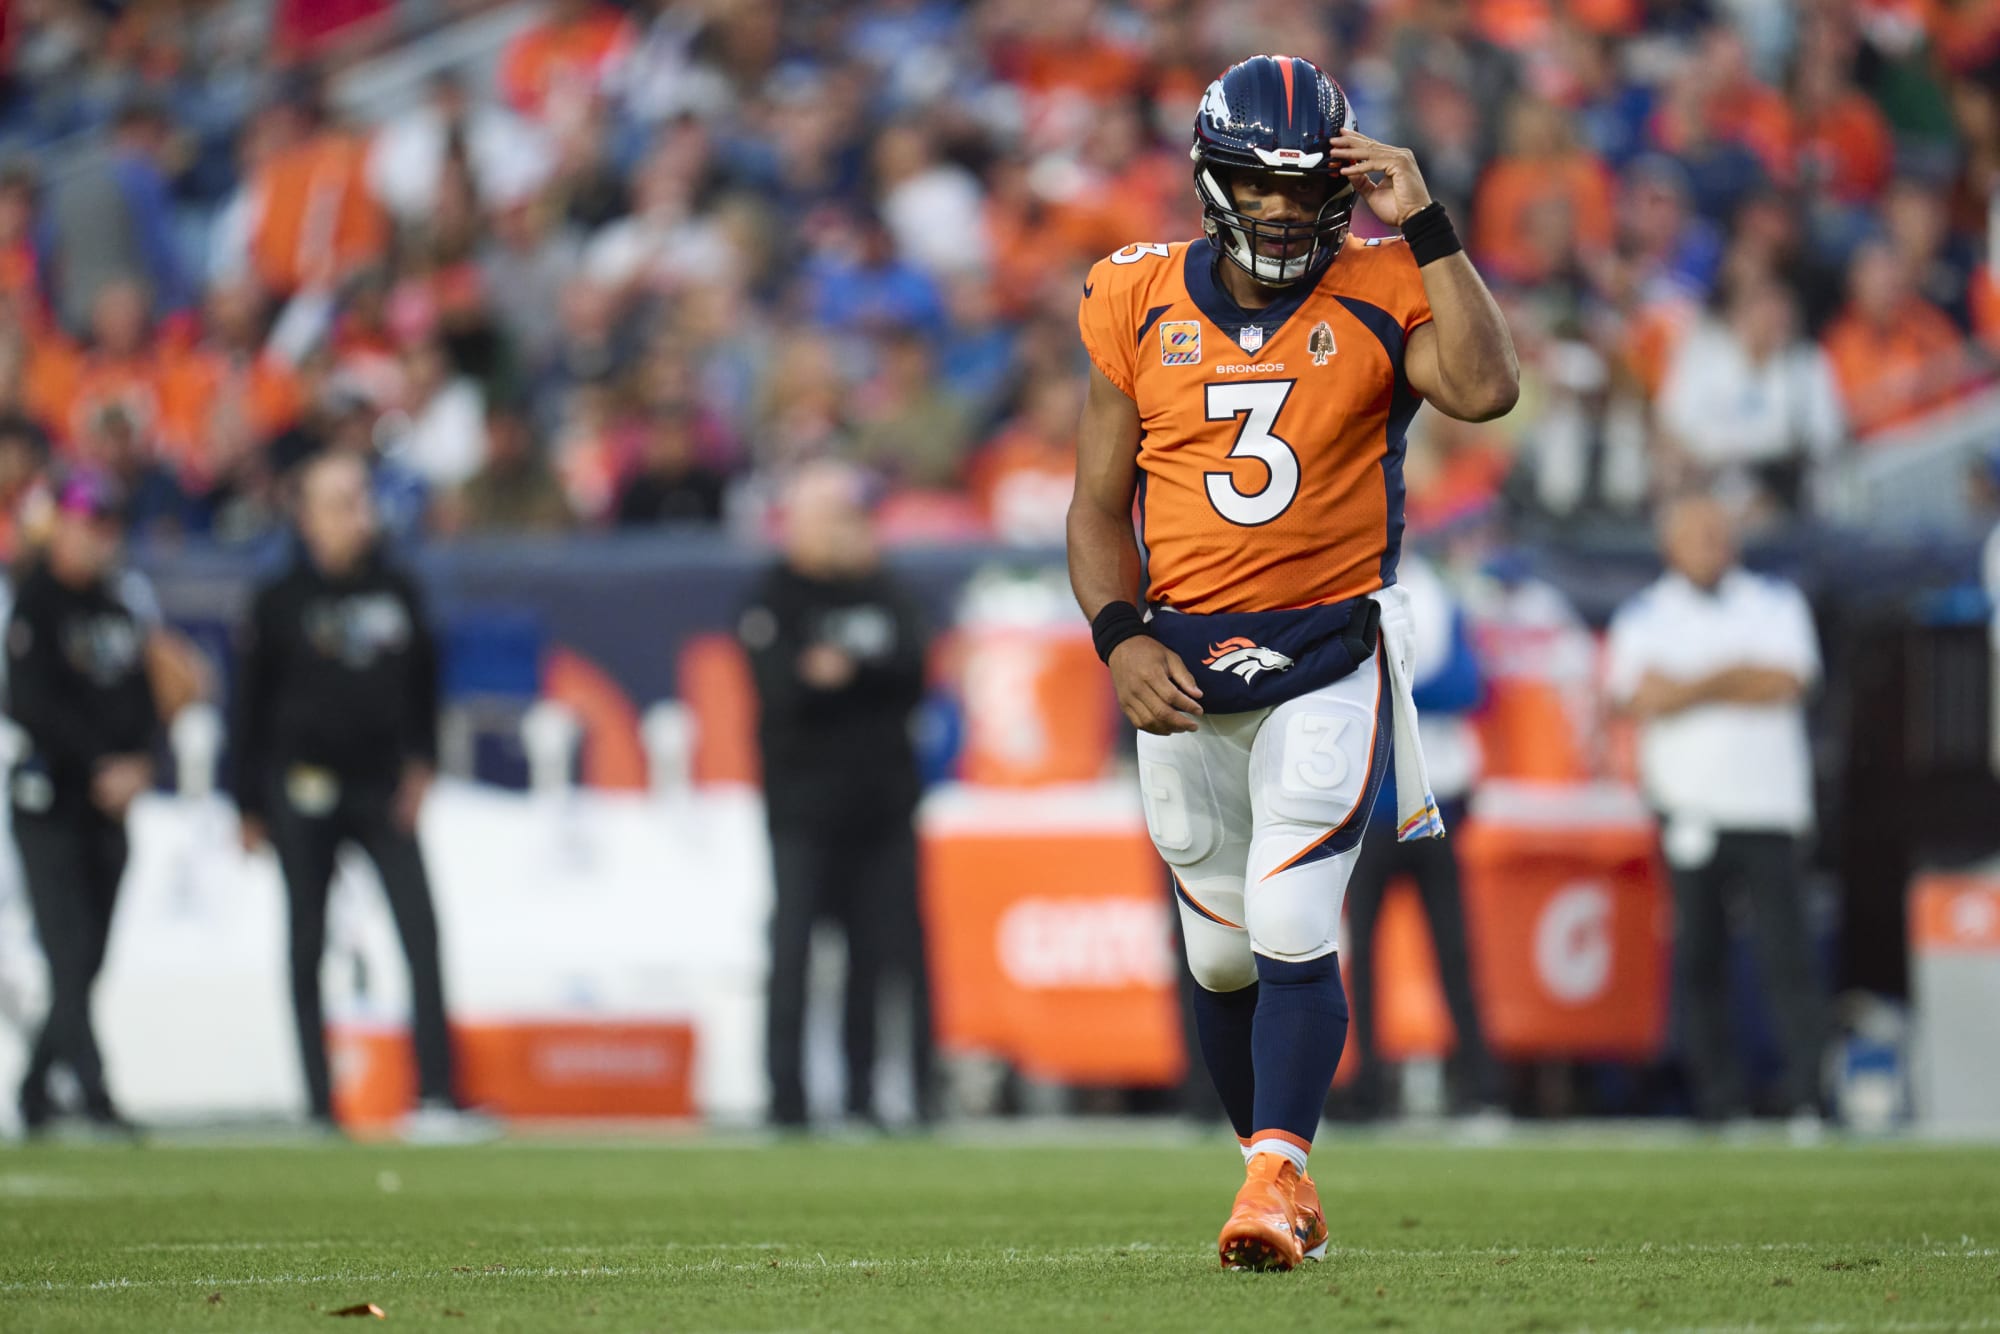 Embarrassed Broncos fans could not bother to watch team play Colts in overtime (Video)